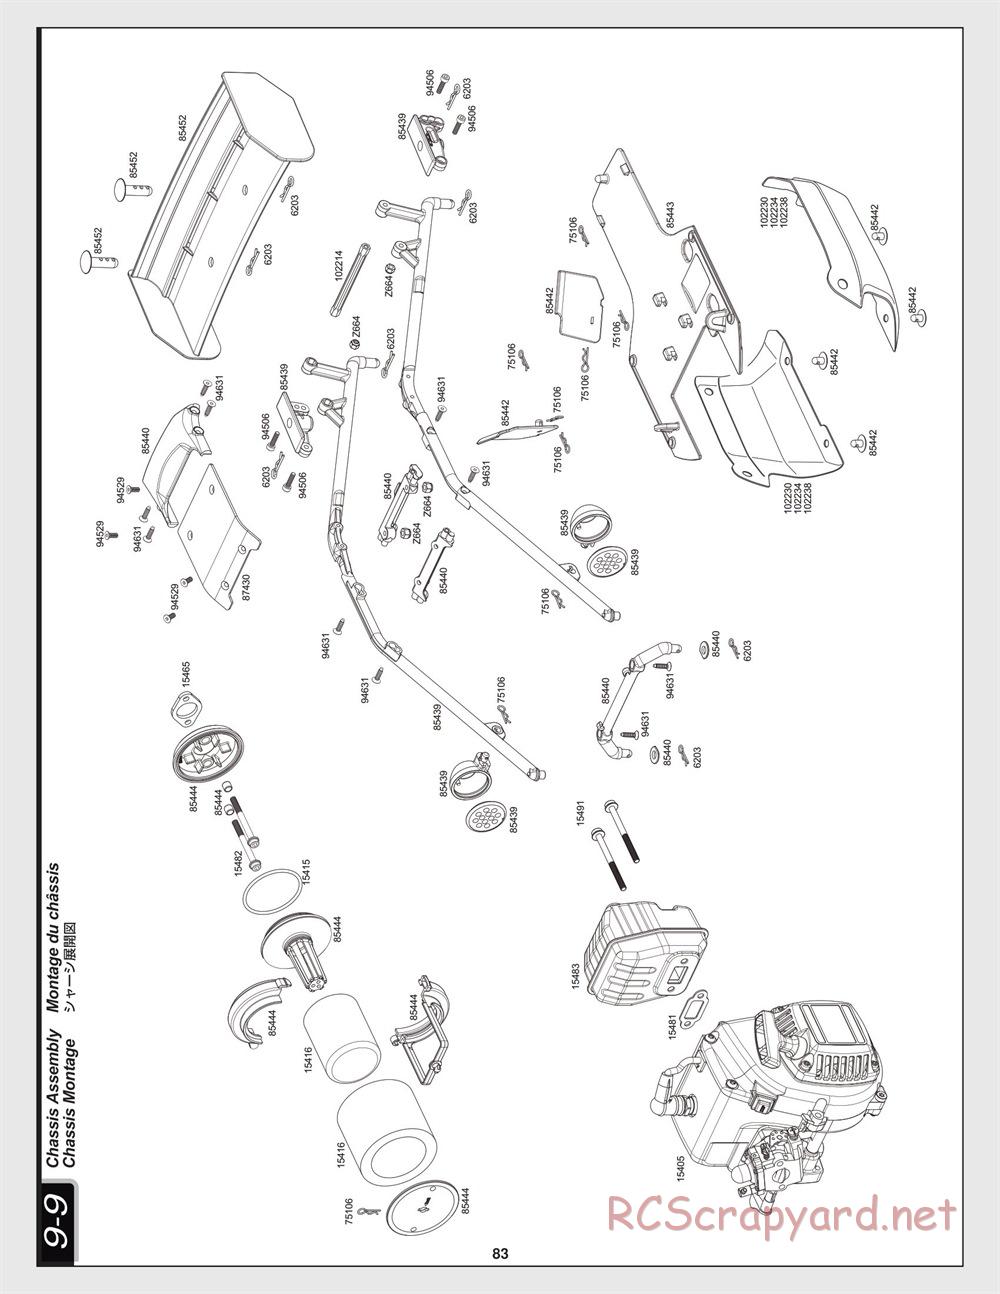 HPI - Baja 5B 2.0 - Exploded View - Page 83